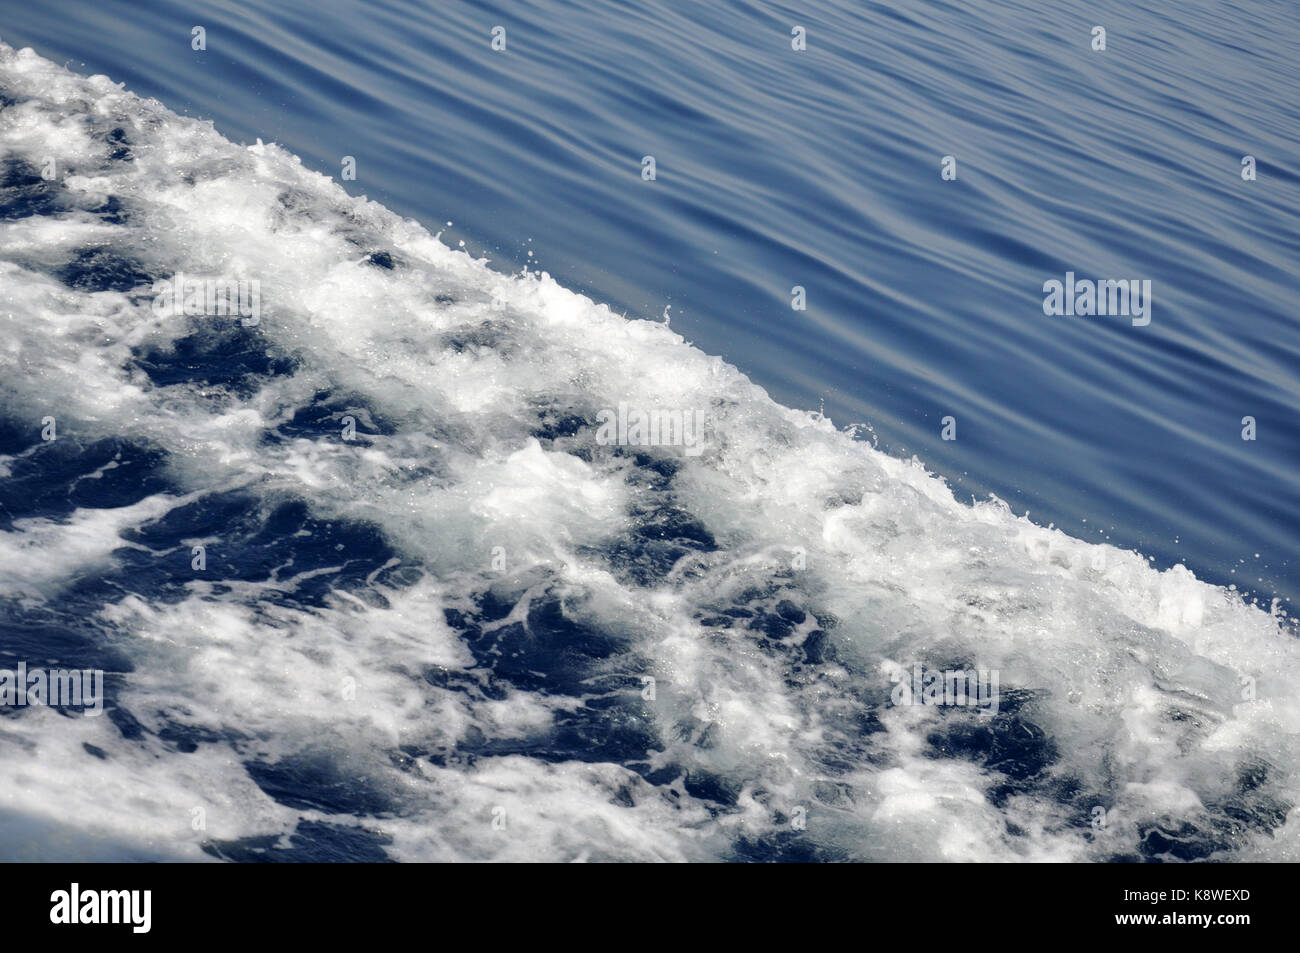 sea waves from a ship Stock Photo